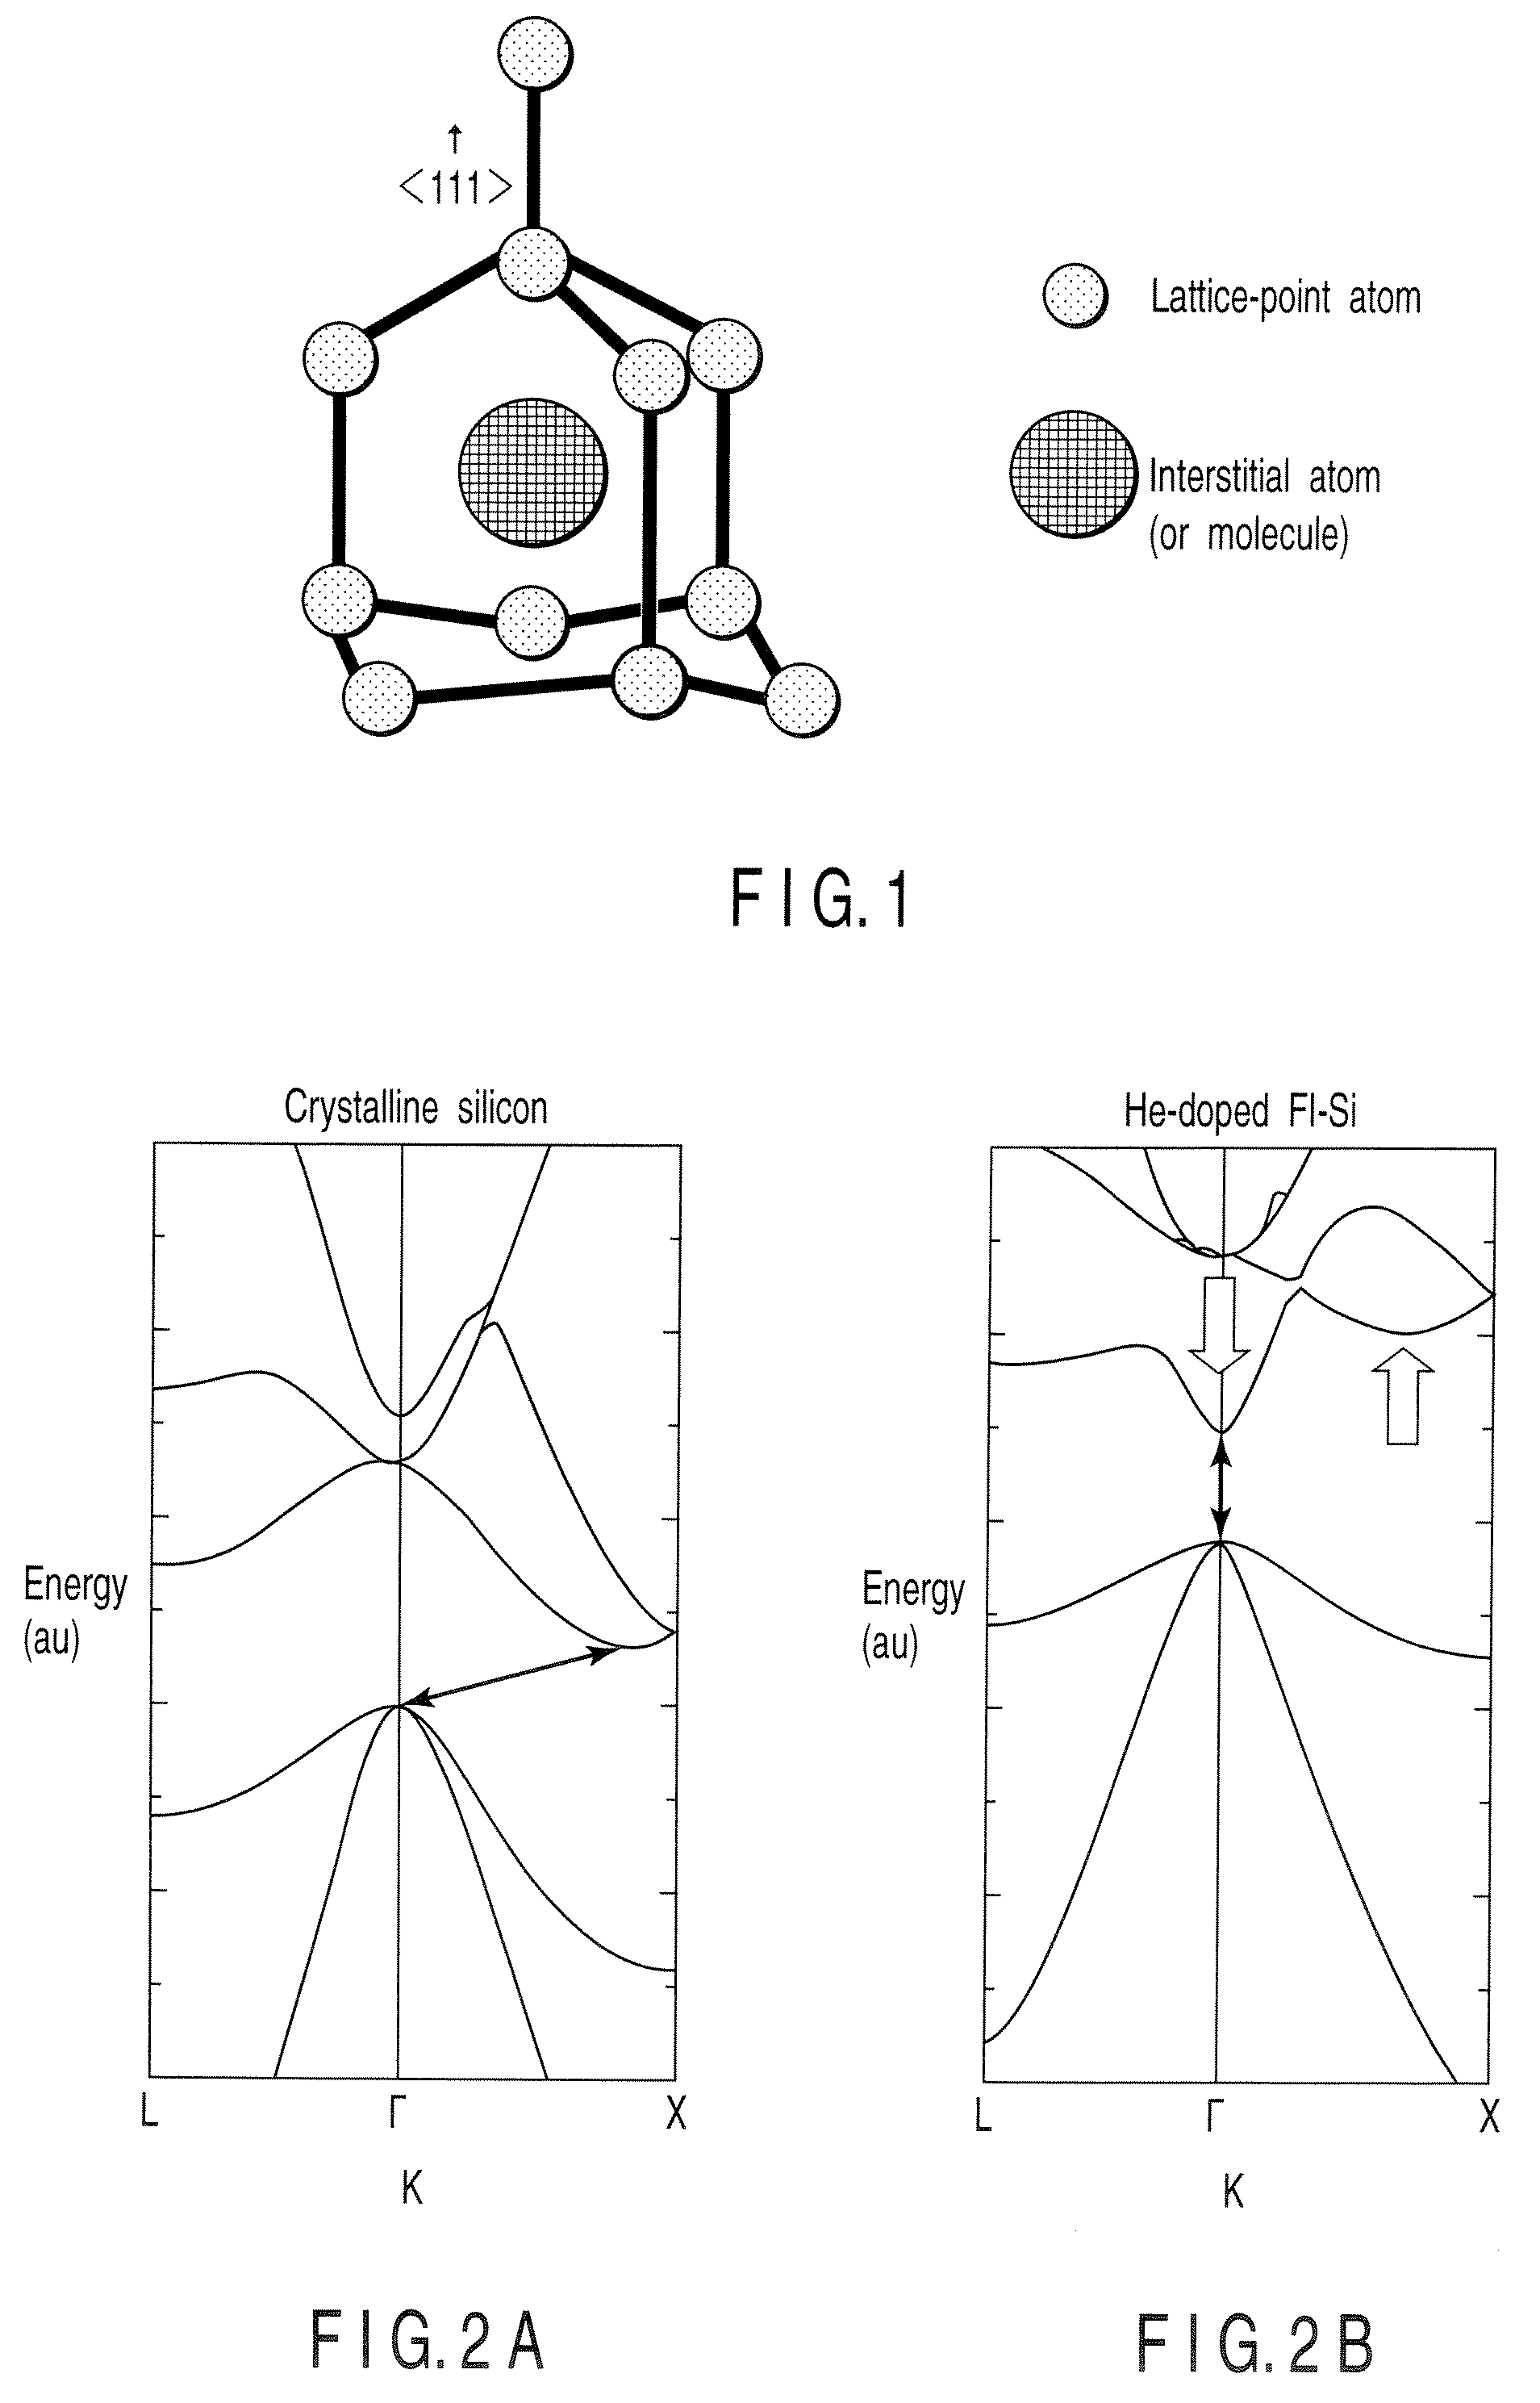 Light emitting device with filled tetrahedral (FT) semiconductor in the active layer